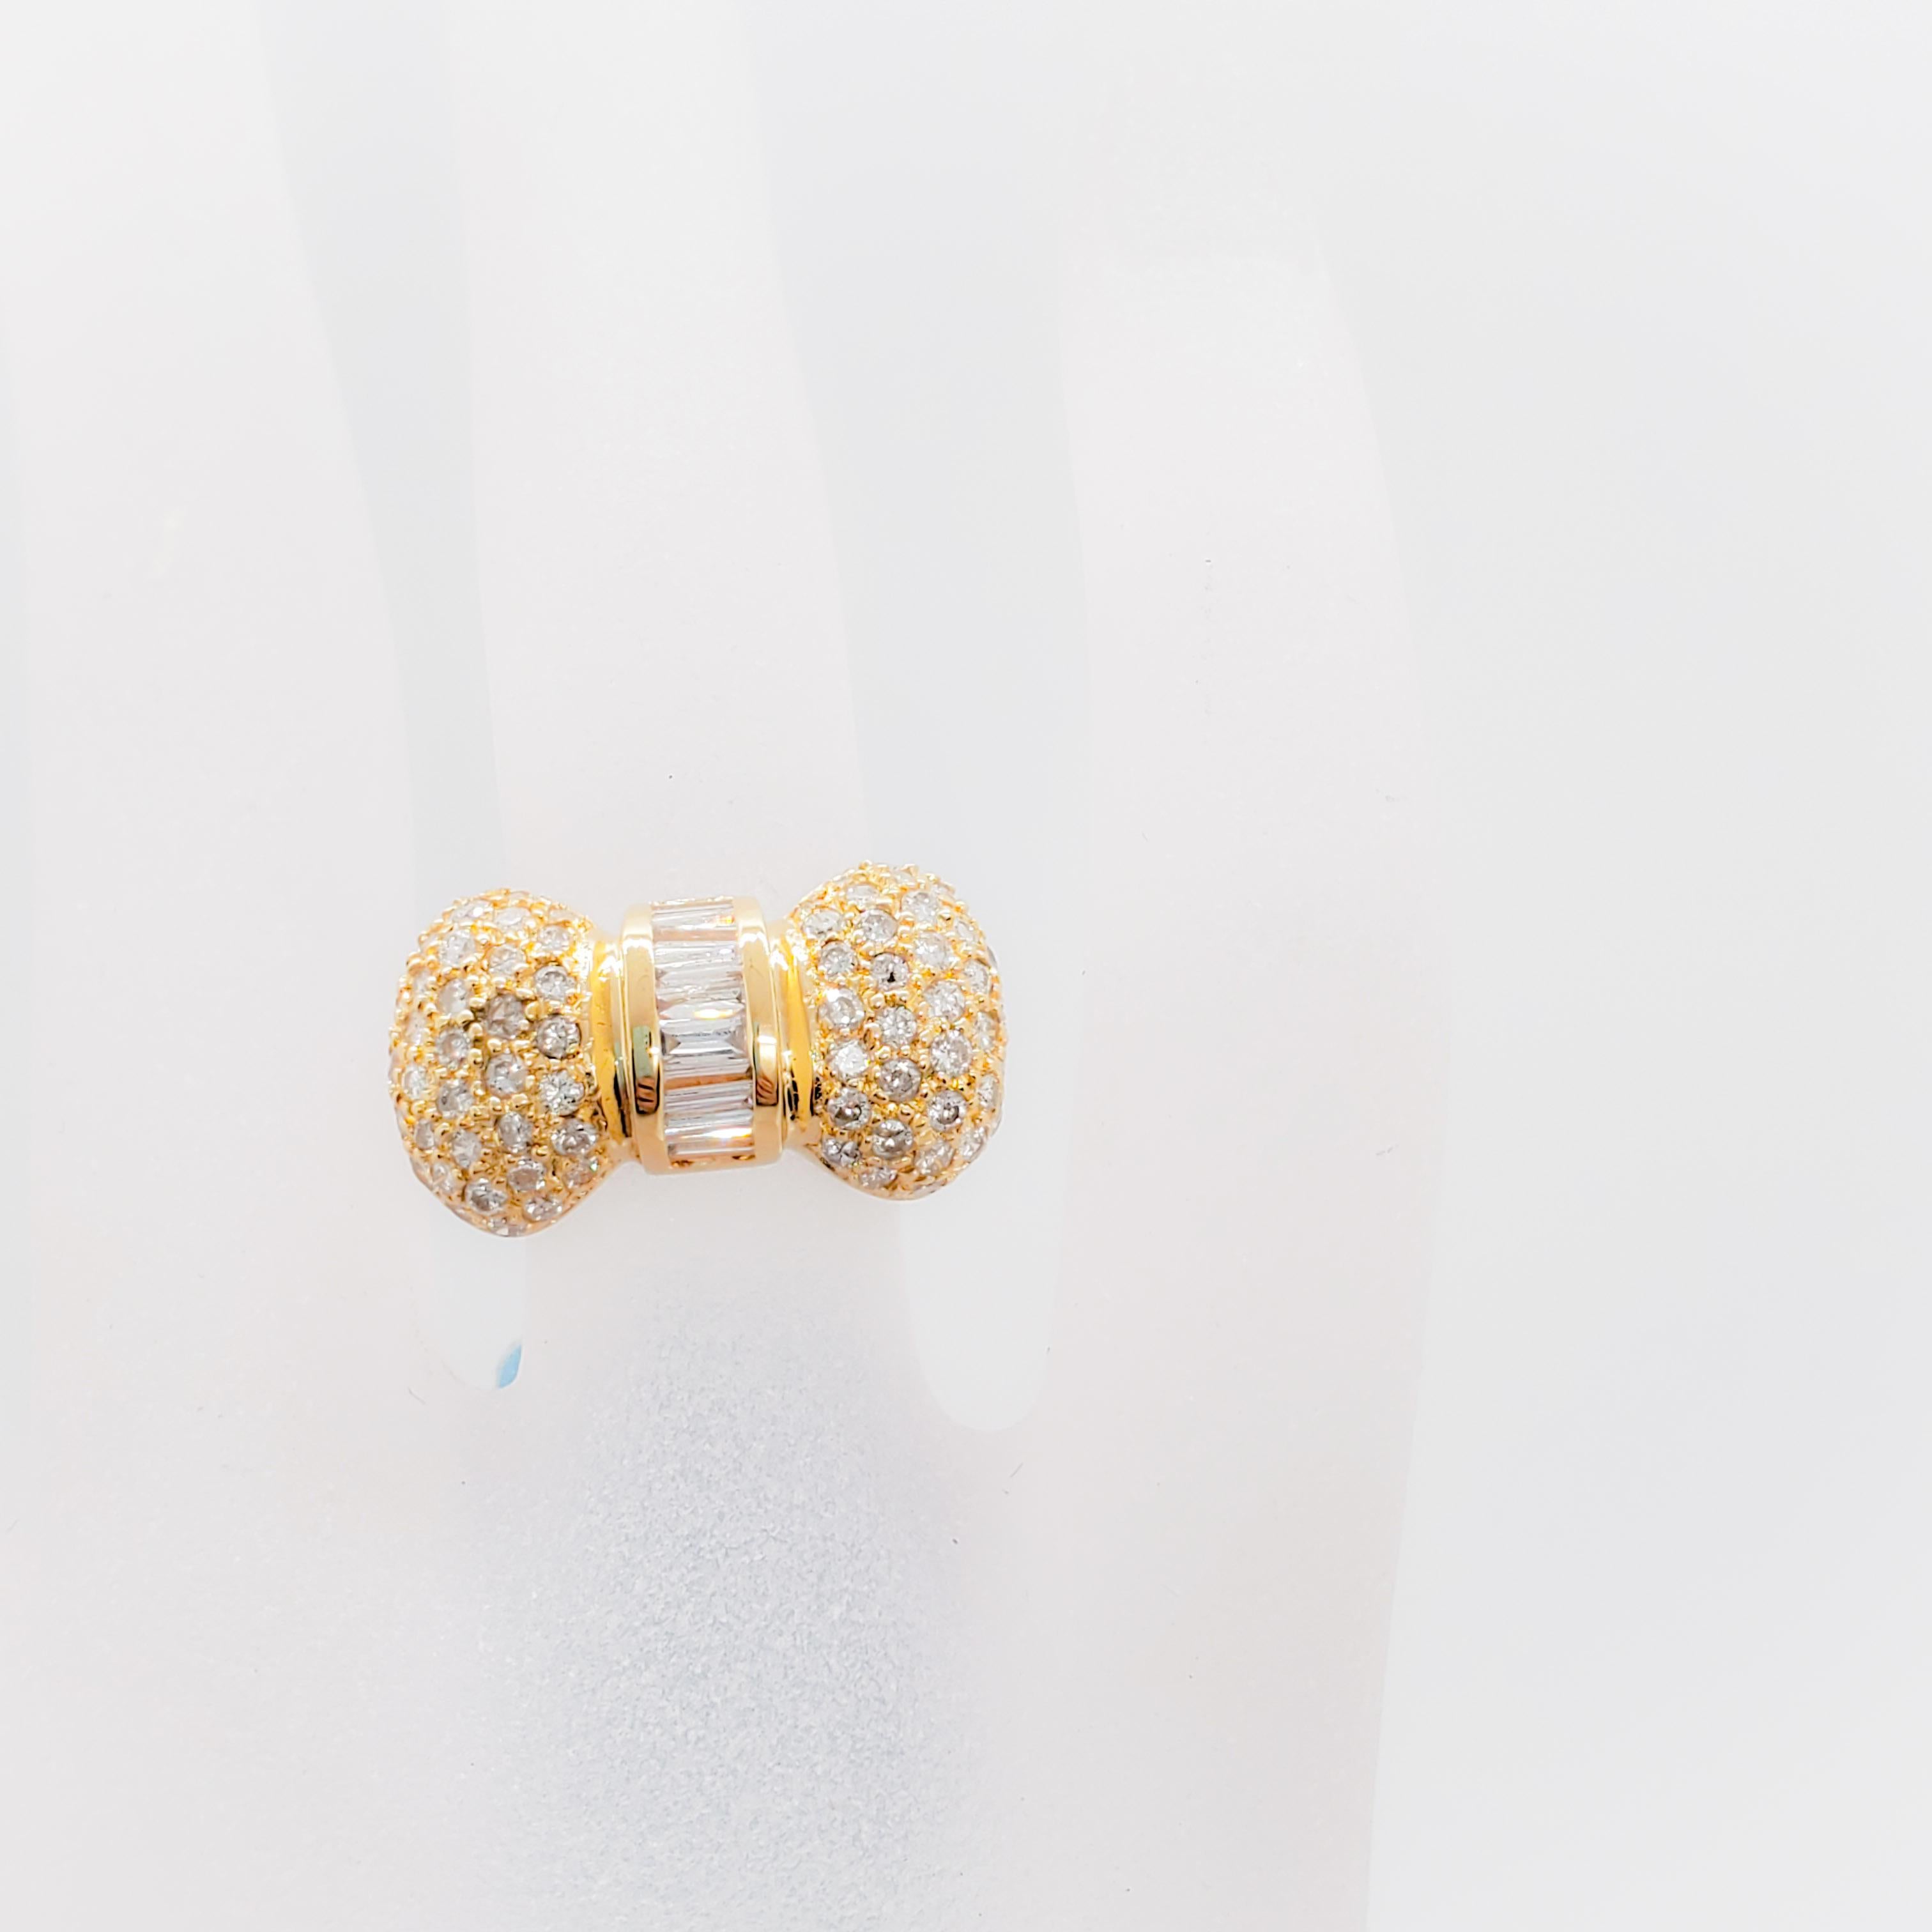 Round Cut White Diamond Baguette and Round Bow Design Ring in 18 Karat Yellow Gold